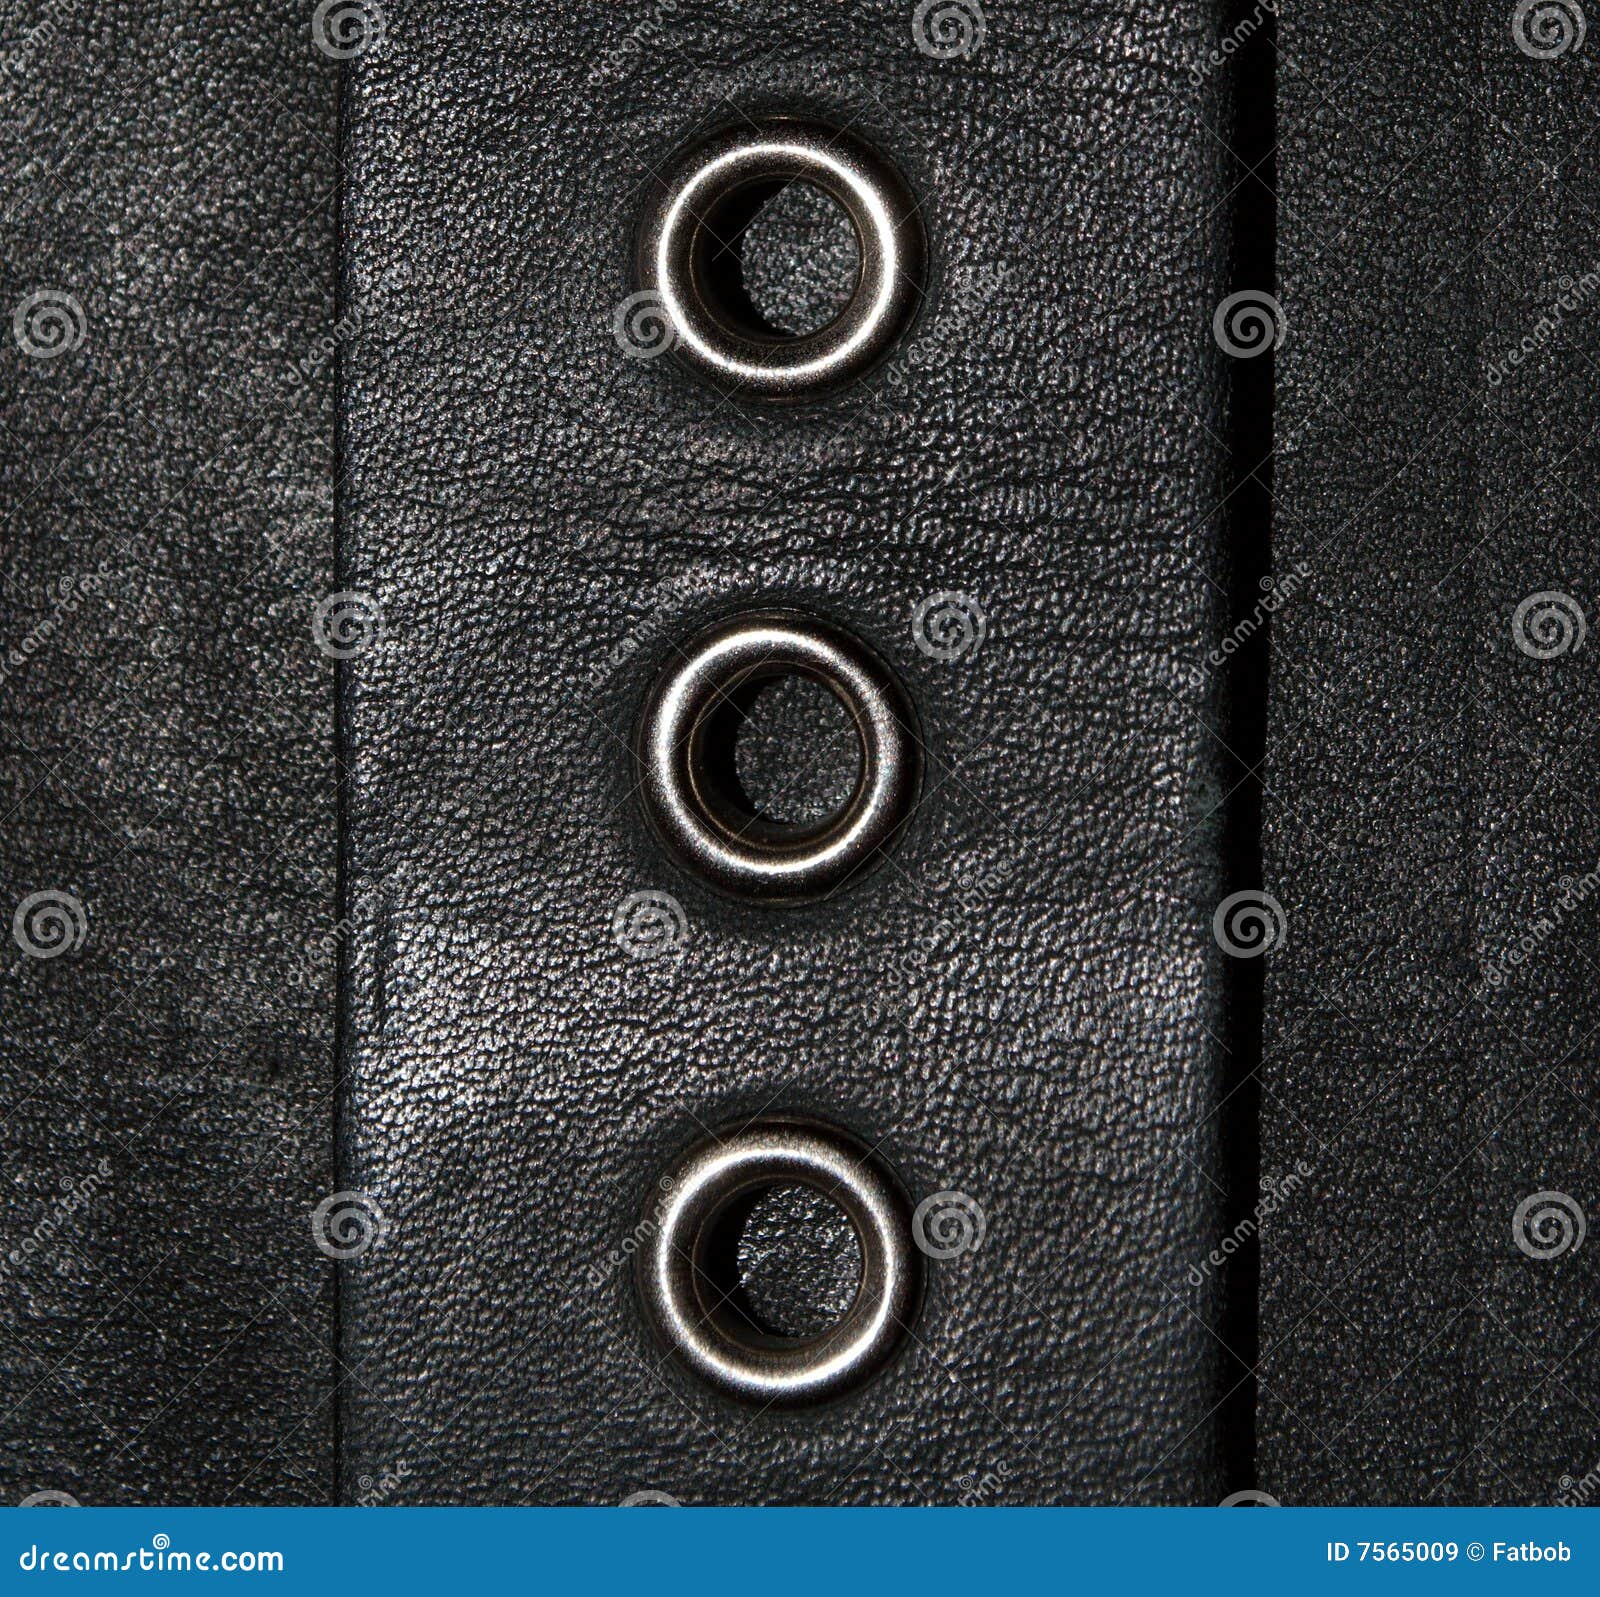 Leather Clinches Background Stock Image - Image of design, detail: 7565009